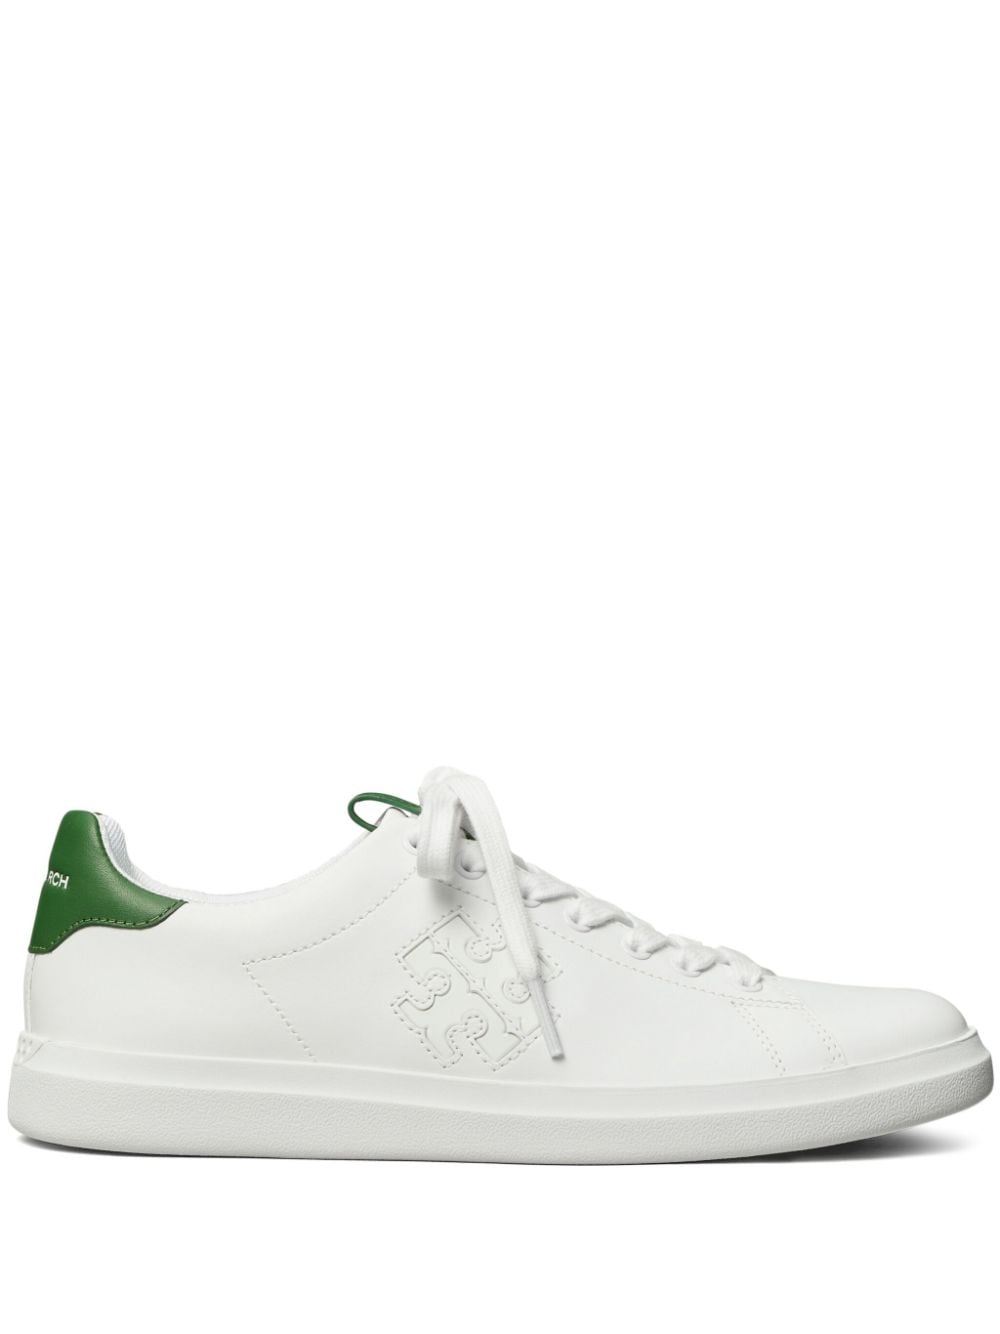 Tory Burch Howell Court leather sneakers - White von Tory Burch